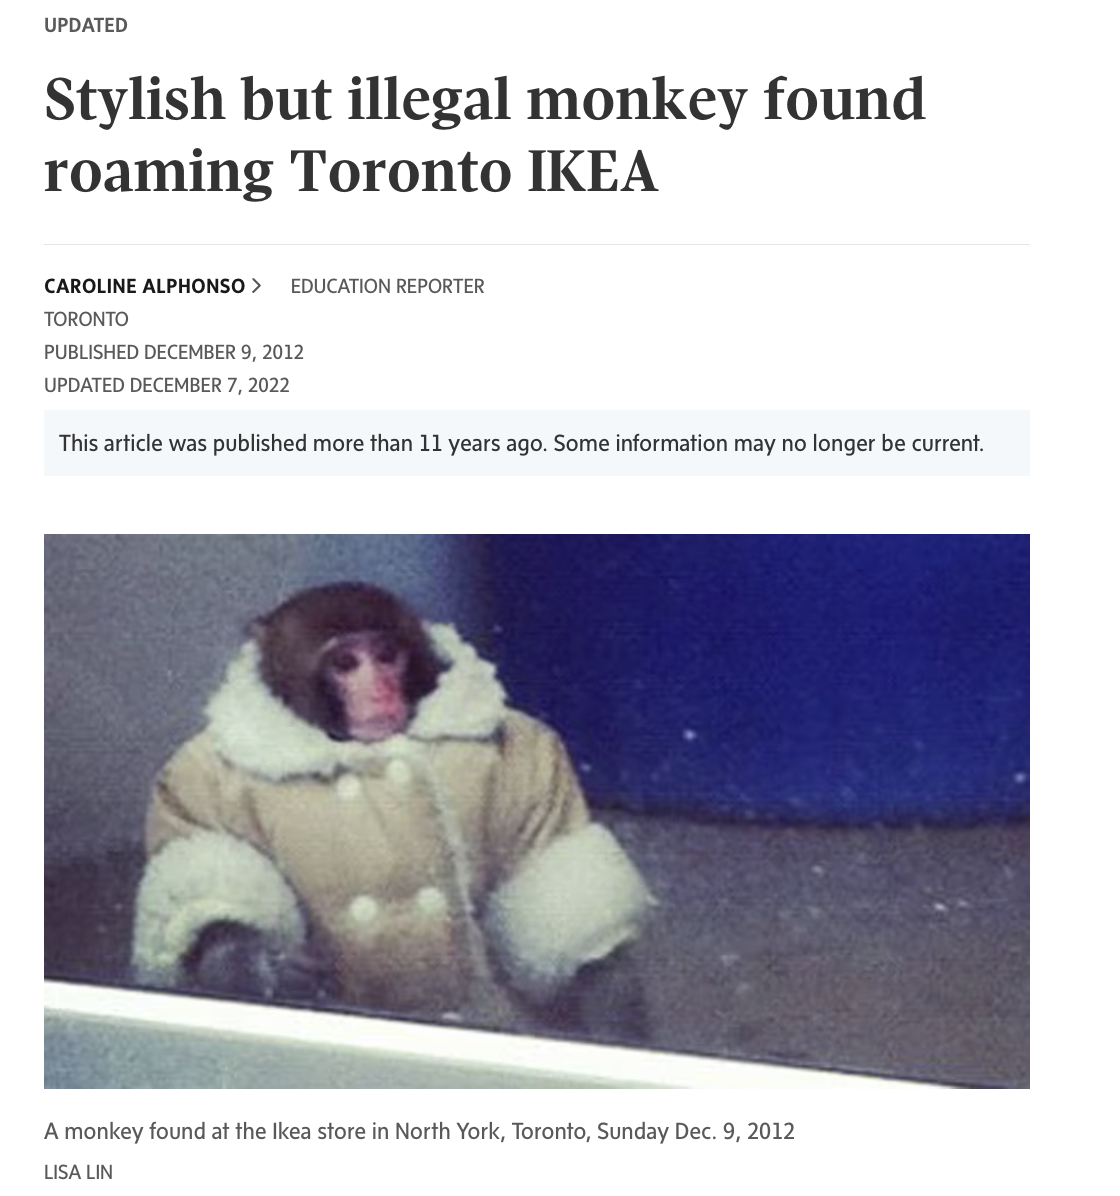 ikea monkey canada - Updated Stylish but illegal monkey found roaming Toronto Ikea Caroline Alphonso > Education Reporter Toronto Published Updated This article was published more than 11 years ago. Some information may no longer be current. A monkey foun